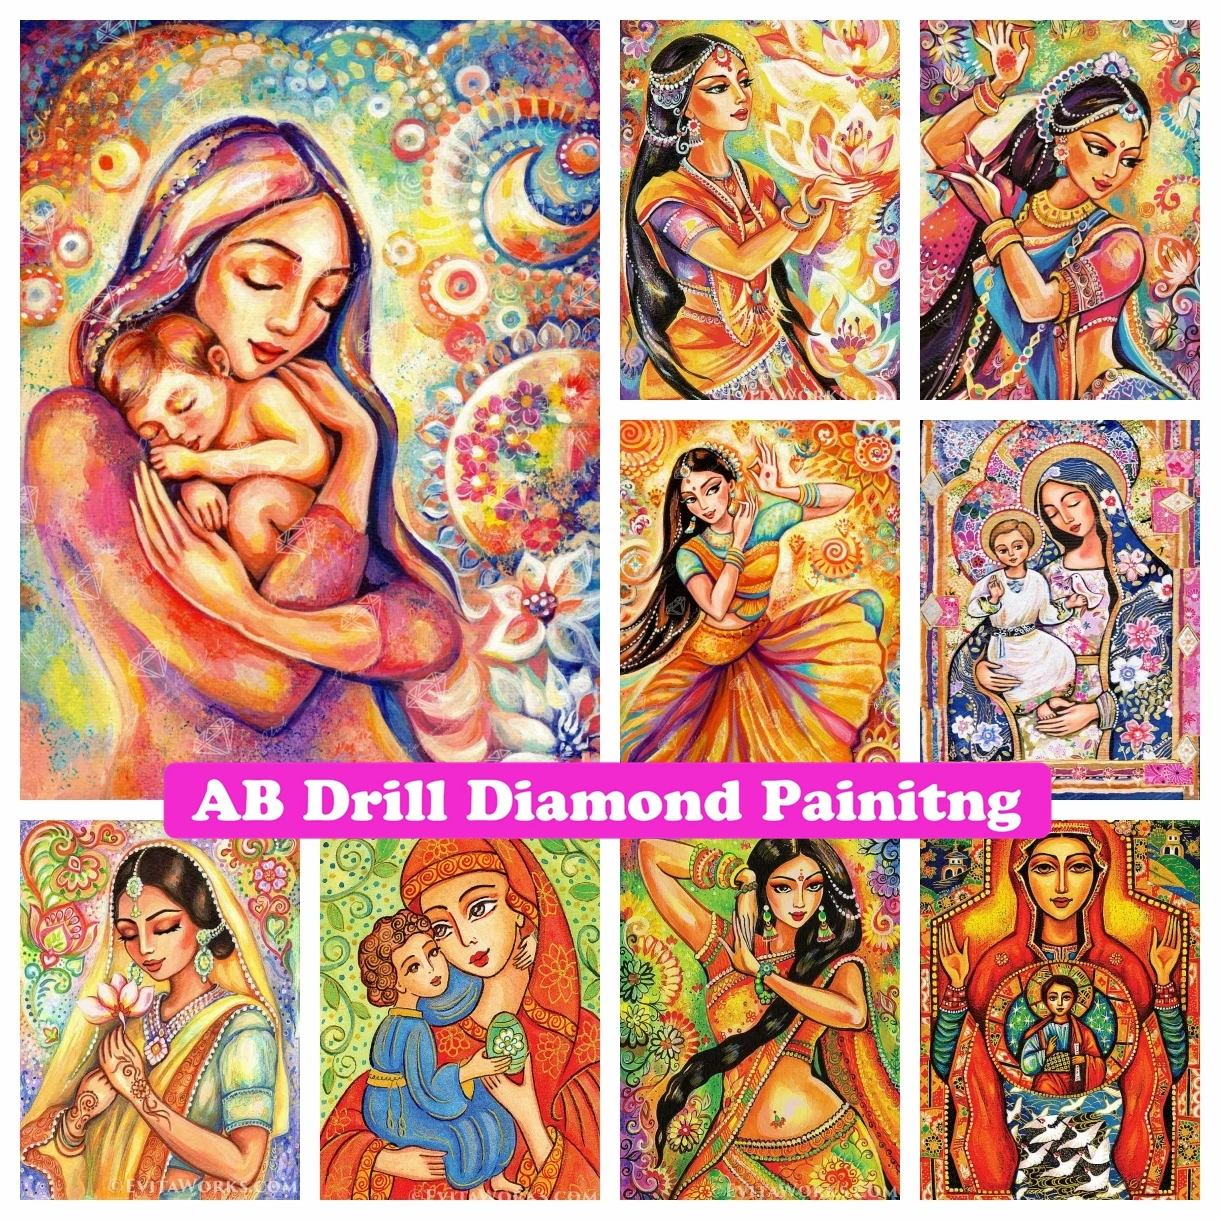 Buy Diamond Painting of a Ballerina Online in India 